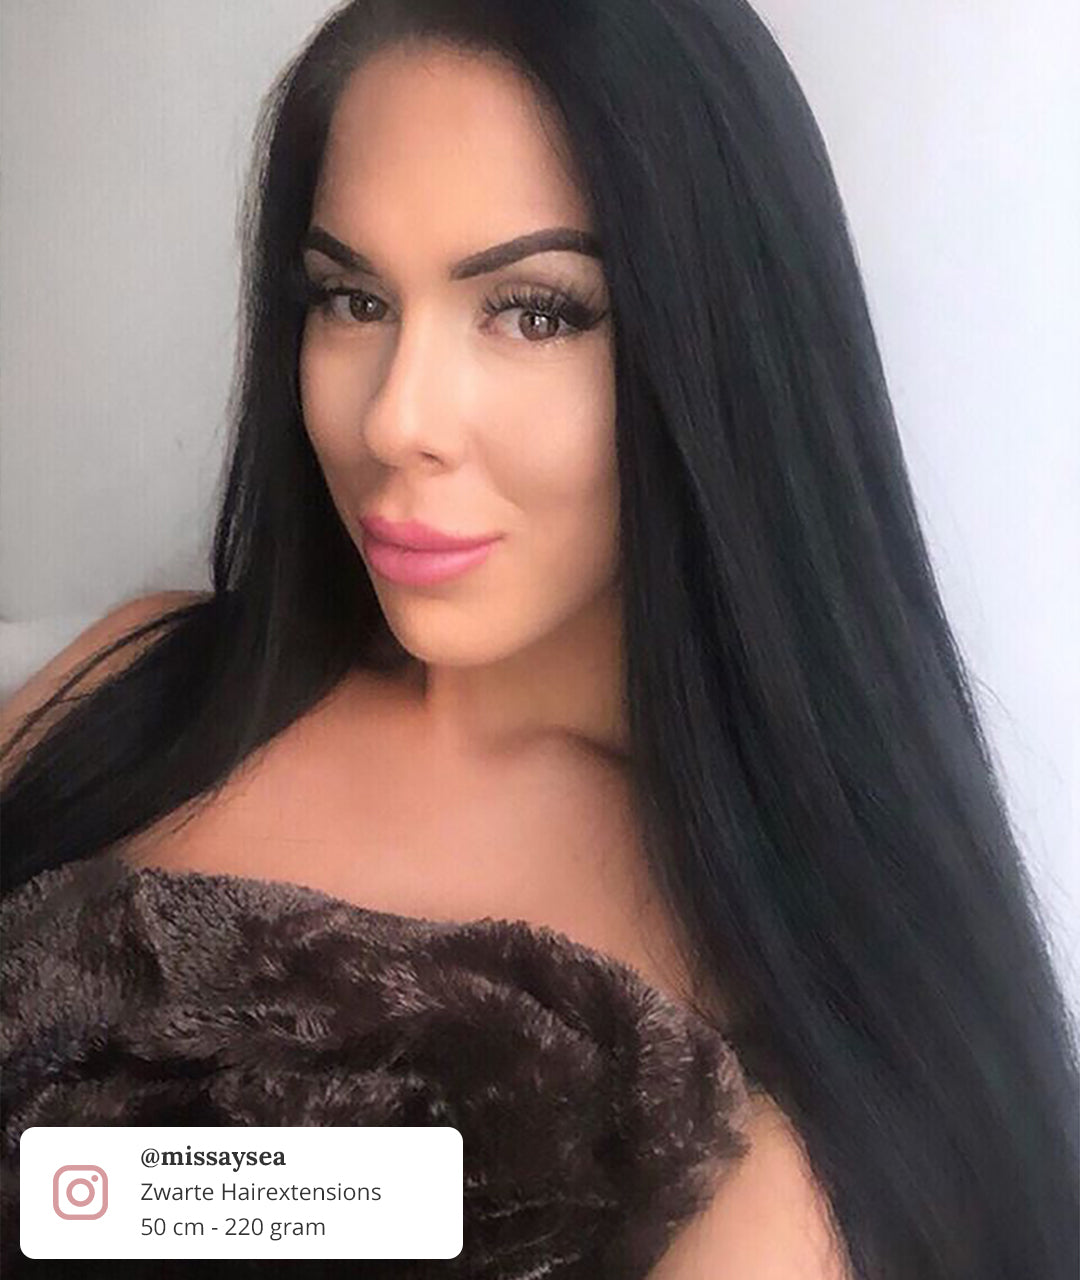 Zwarte clip-in hairextensions 🖤 Hairextensions